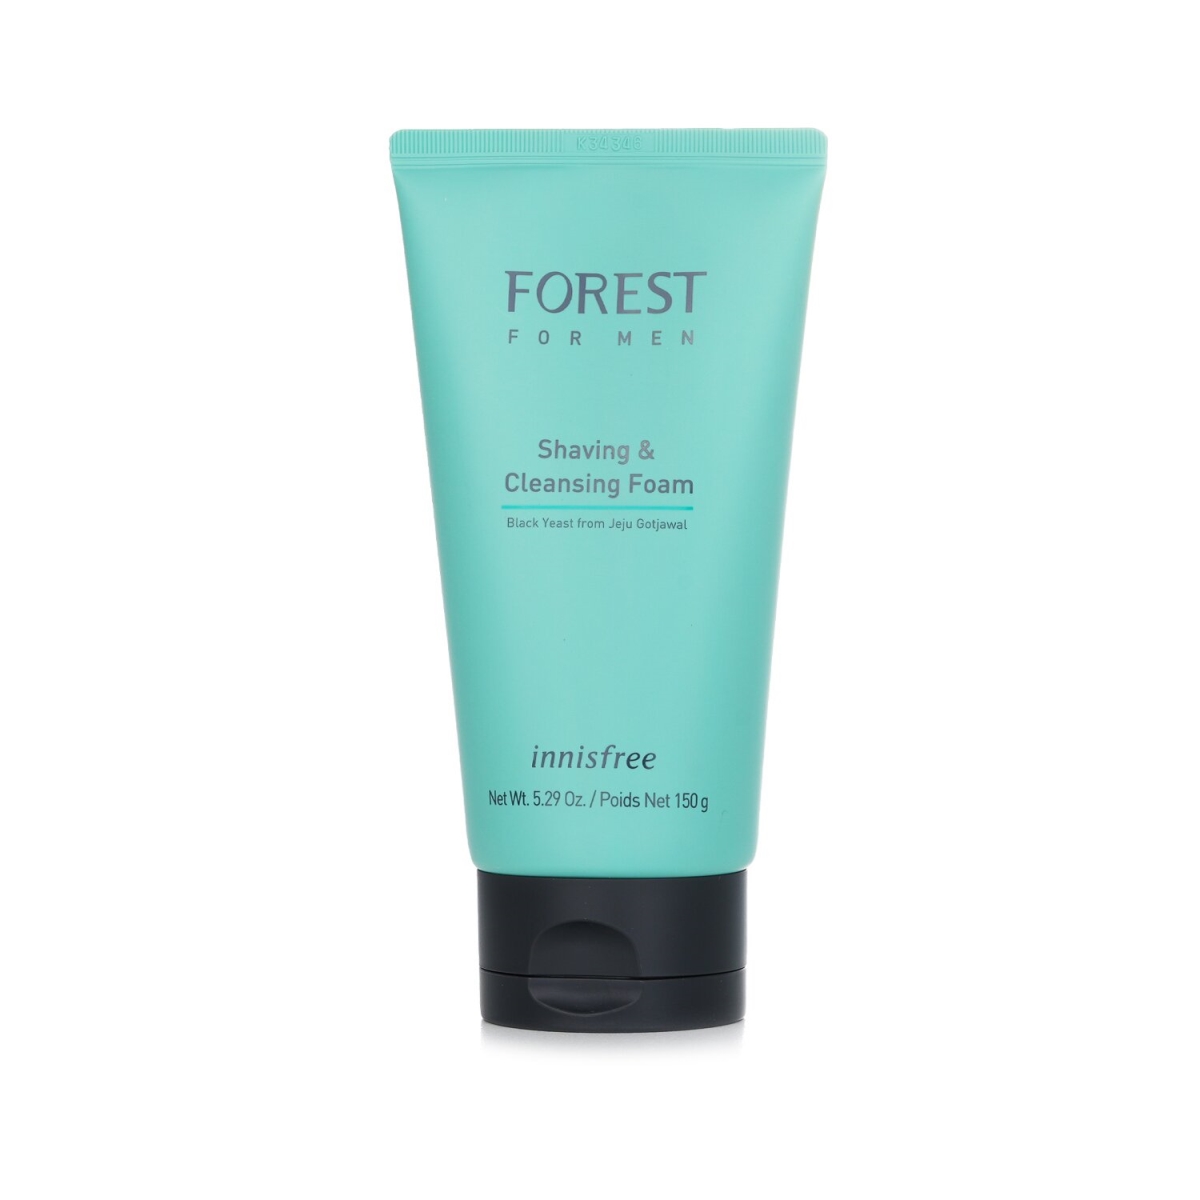 Picture of Innisfree 280295 5.29 oz Mens Forest Shaving & Cleansing Foam